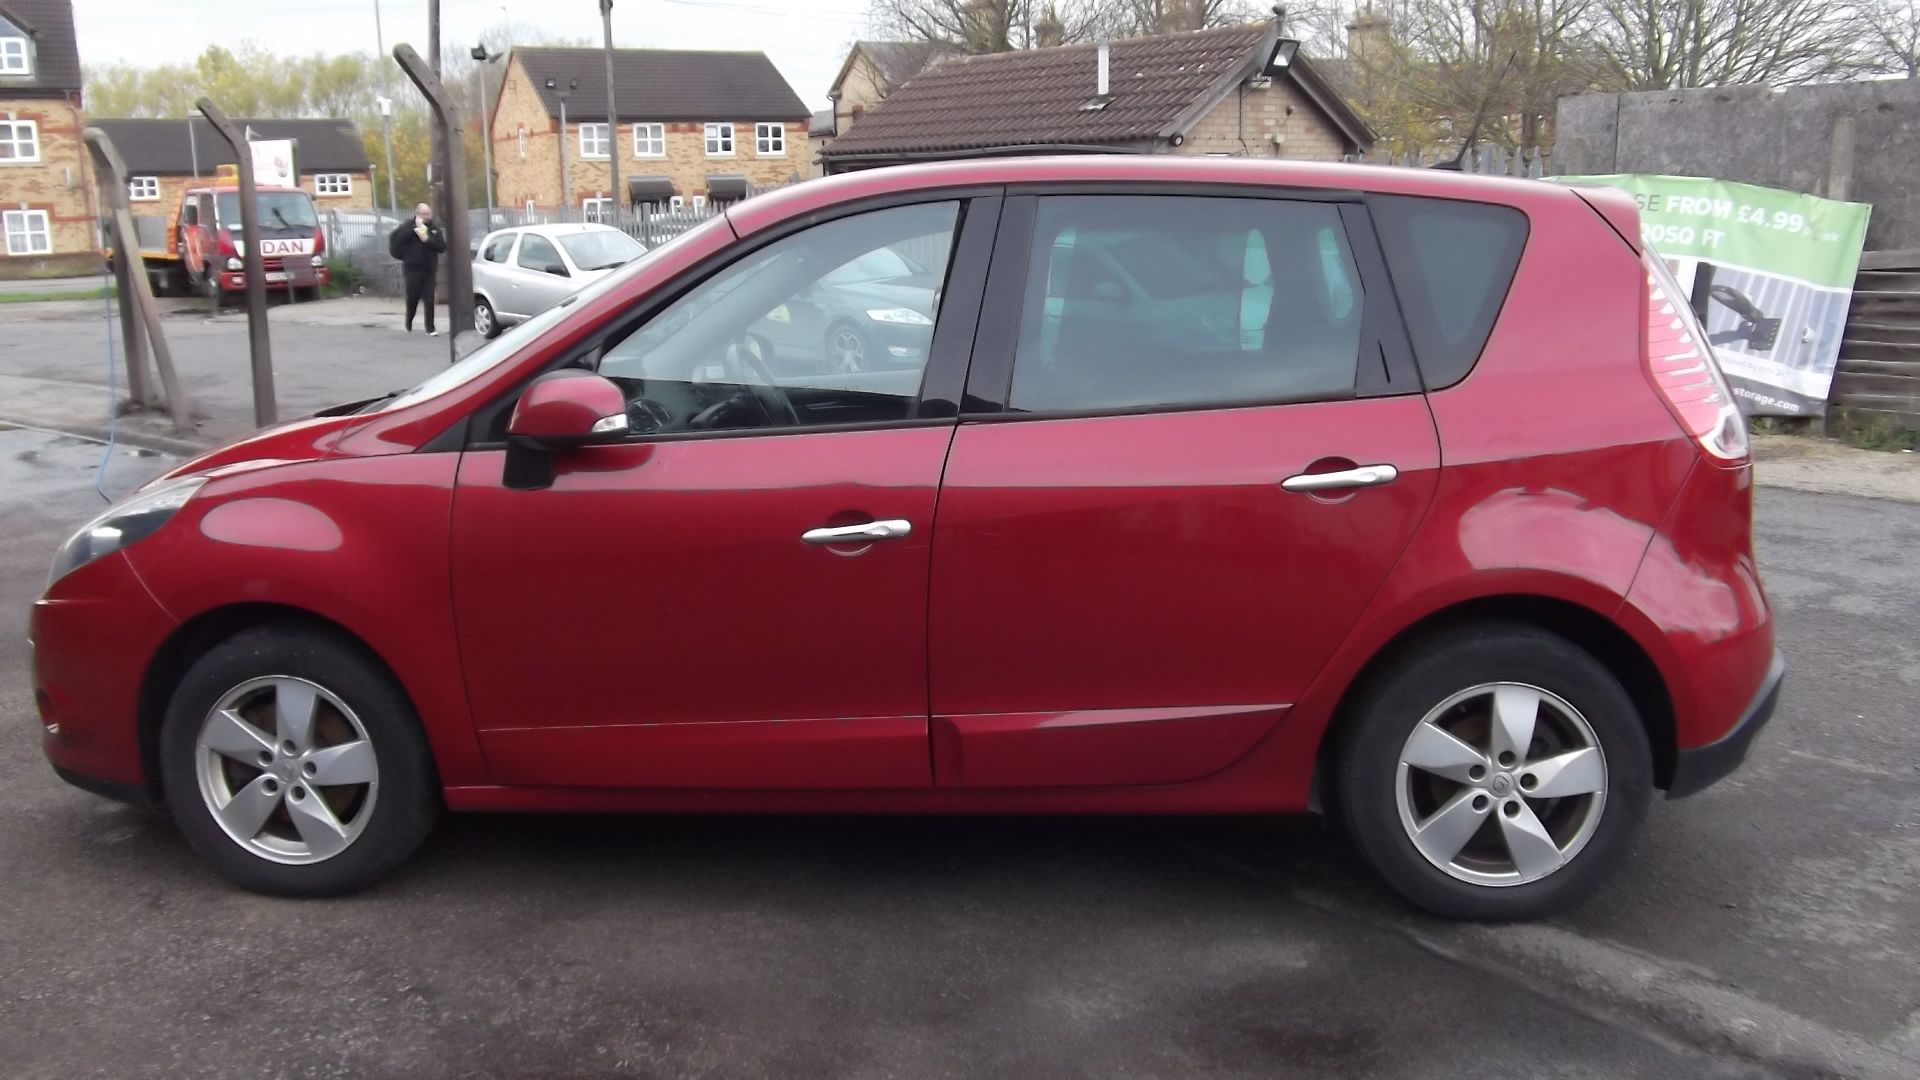 2011 Renault Scenic 1.5 DCI Dynamique Tom Tom 5 Door MPV - Image 6 of 17